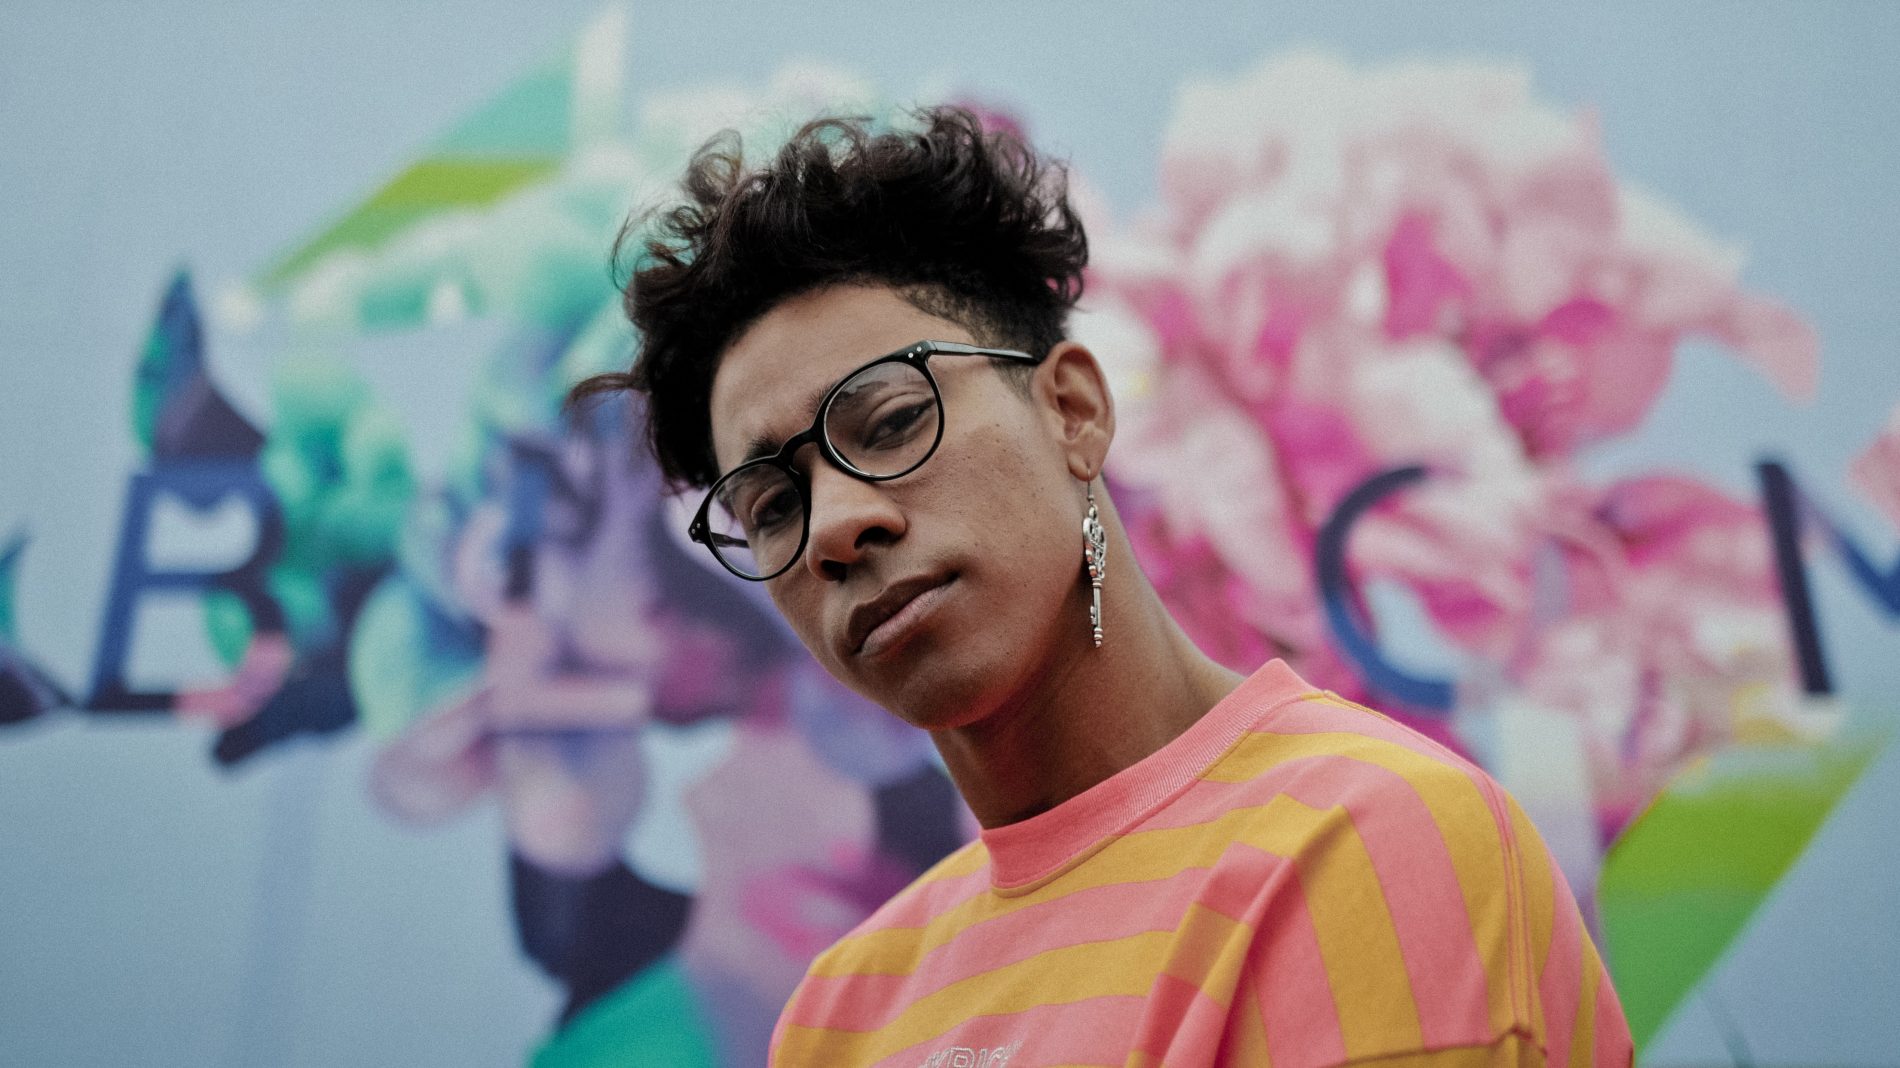 “I Think Masculinity Is Fragile.” Keiynan Lonsdale urges men to embrace femininity in inspiring post